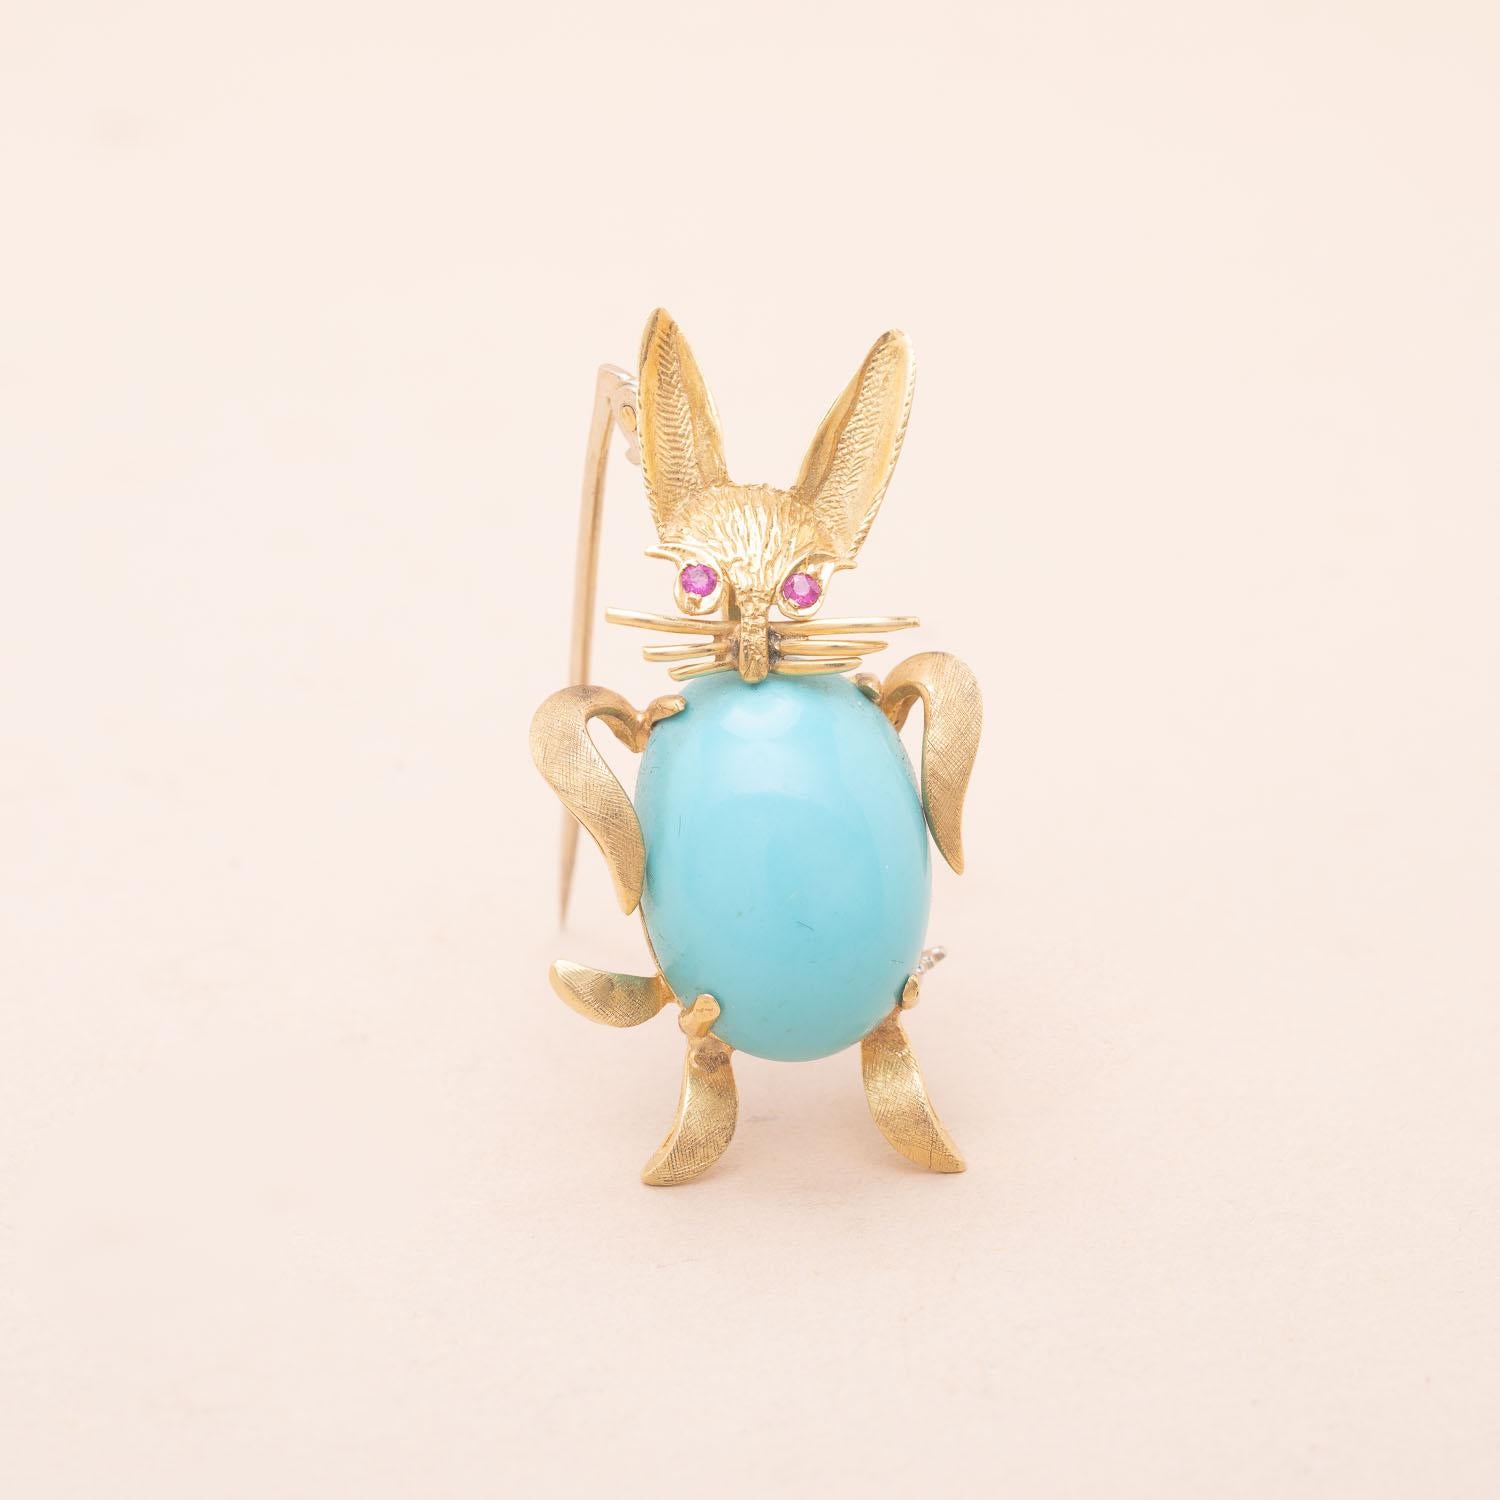 18K Two-toned gold turquoise rabbit brooch. The rabbit's eyes are made of brillant-cut rubies 
Engraved and brushed gold 
Vintage from the seventies, probably greek craftsmanship 
61 AA, owl and 750 hallmarks
Height : 4cm
Gross weight : 6.55g